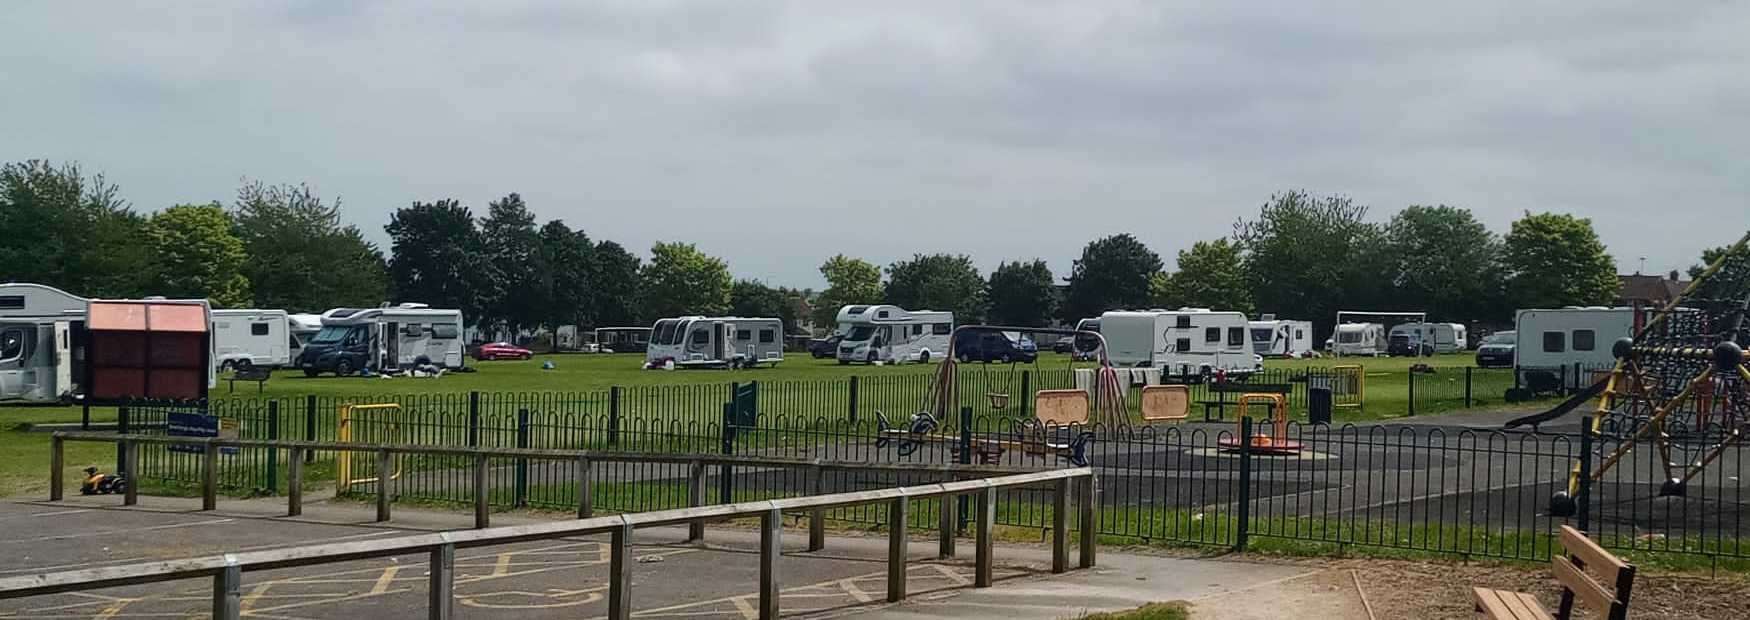 An unauthorised Traveller encampment has returned to Beechings Way Playing Fields in Twydall